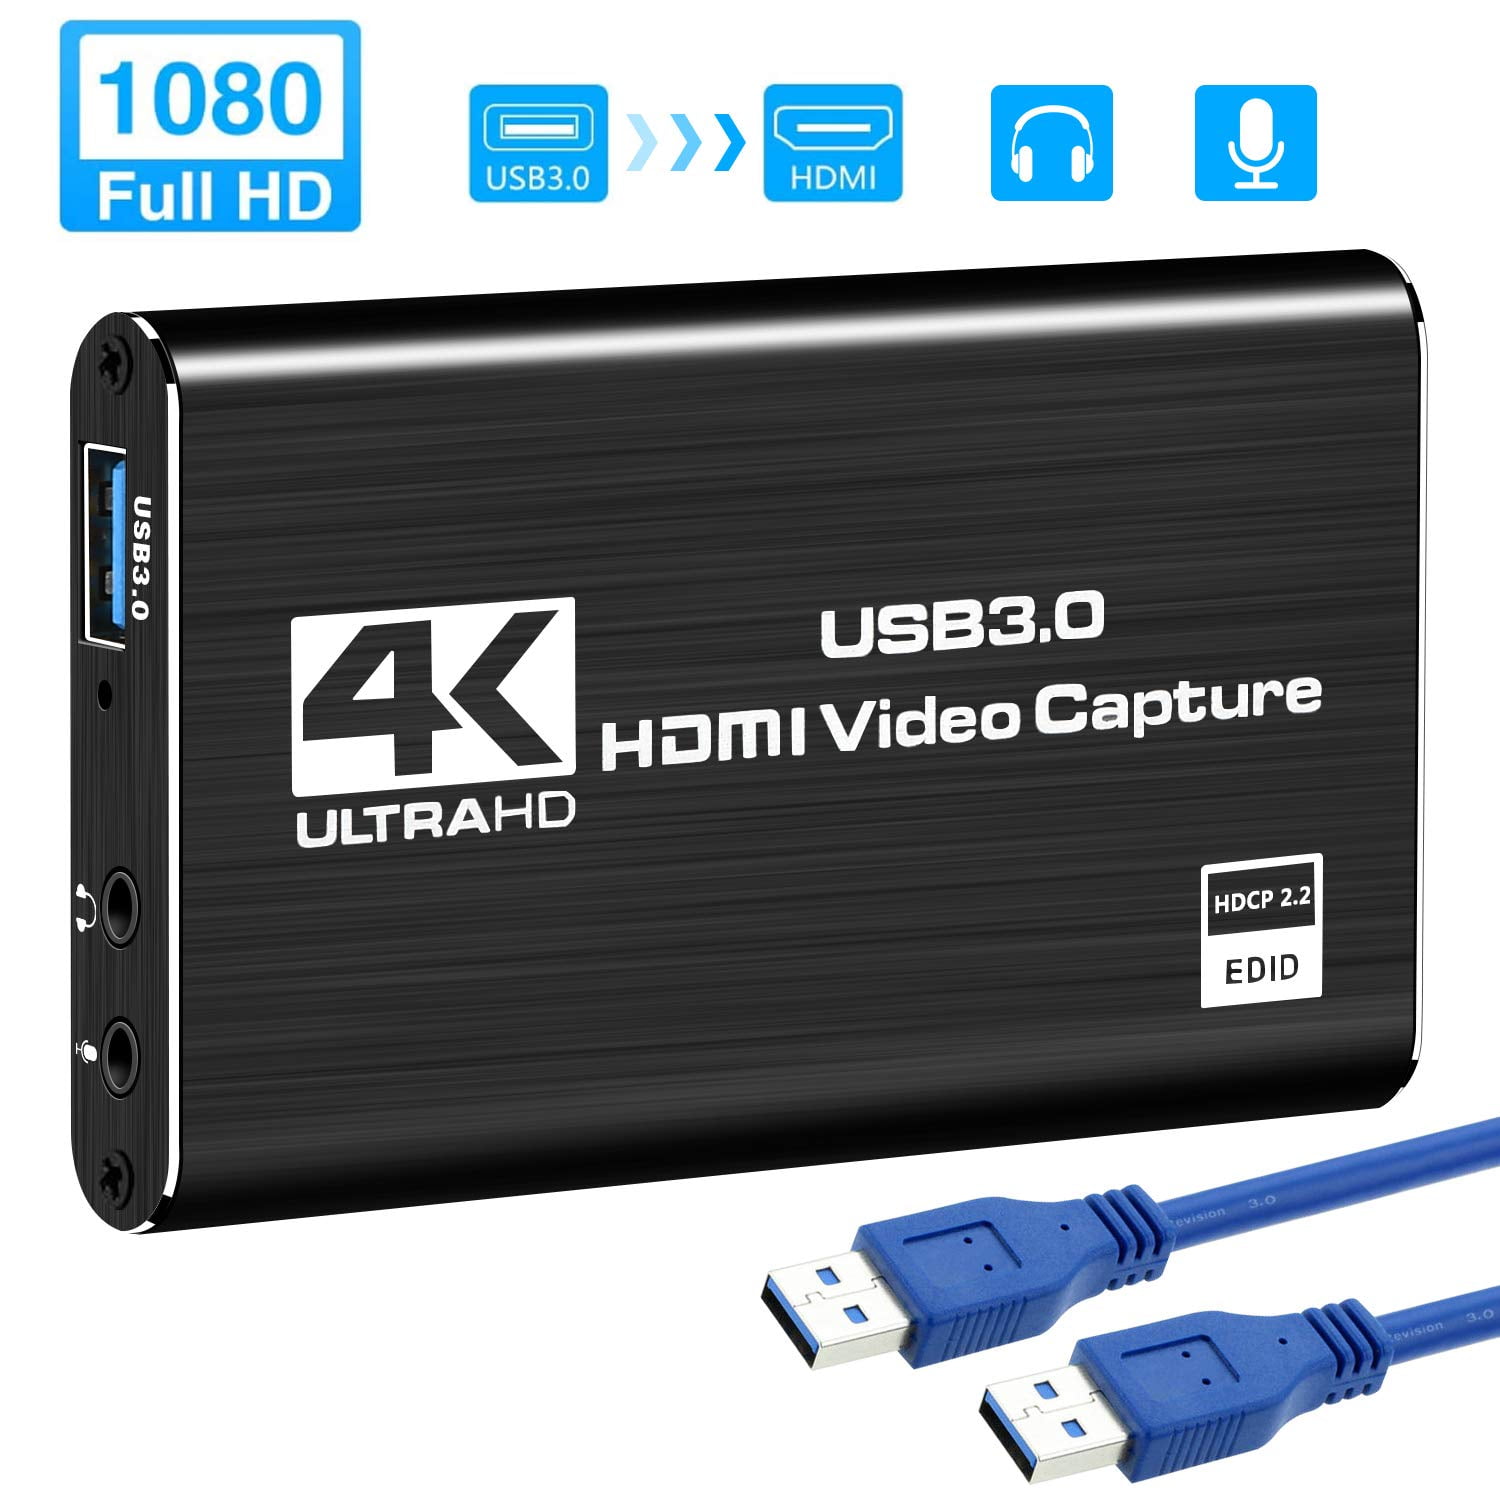 klaver Kreta jernbane ANSTEN Video Capture Card, HDMI to USB3.0 4K 60HZ Game Capture Device  Support Windows Linux OS X System OBS YouTube Twitch Streaming and Recording  for PS4 Xbox One Game Use - Walmart.com